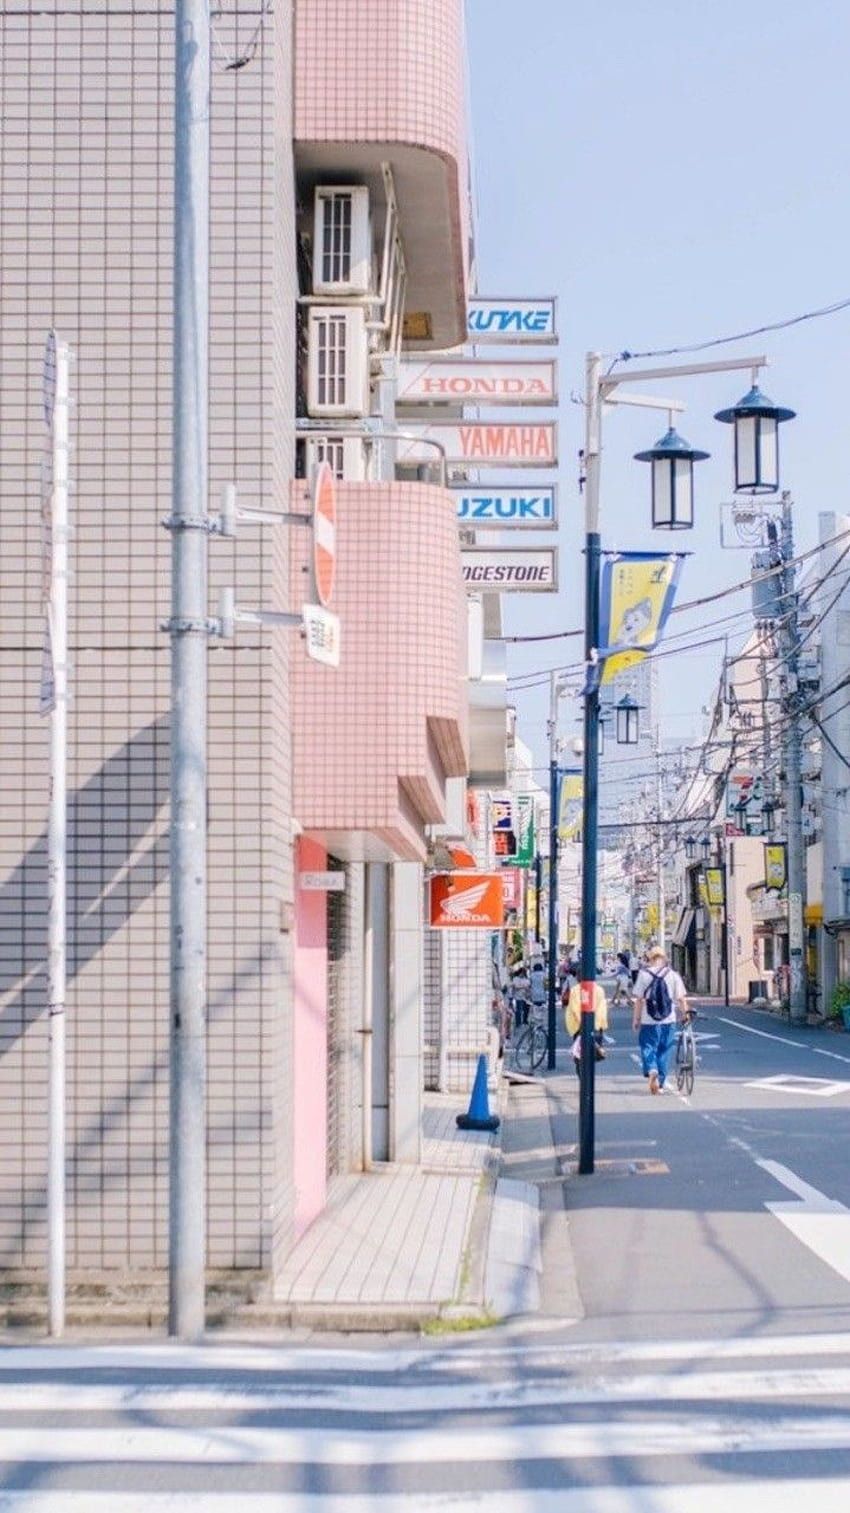 A street corner with a pink building and signs in Japanese. - Seoul